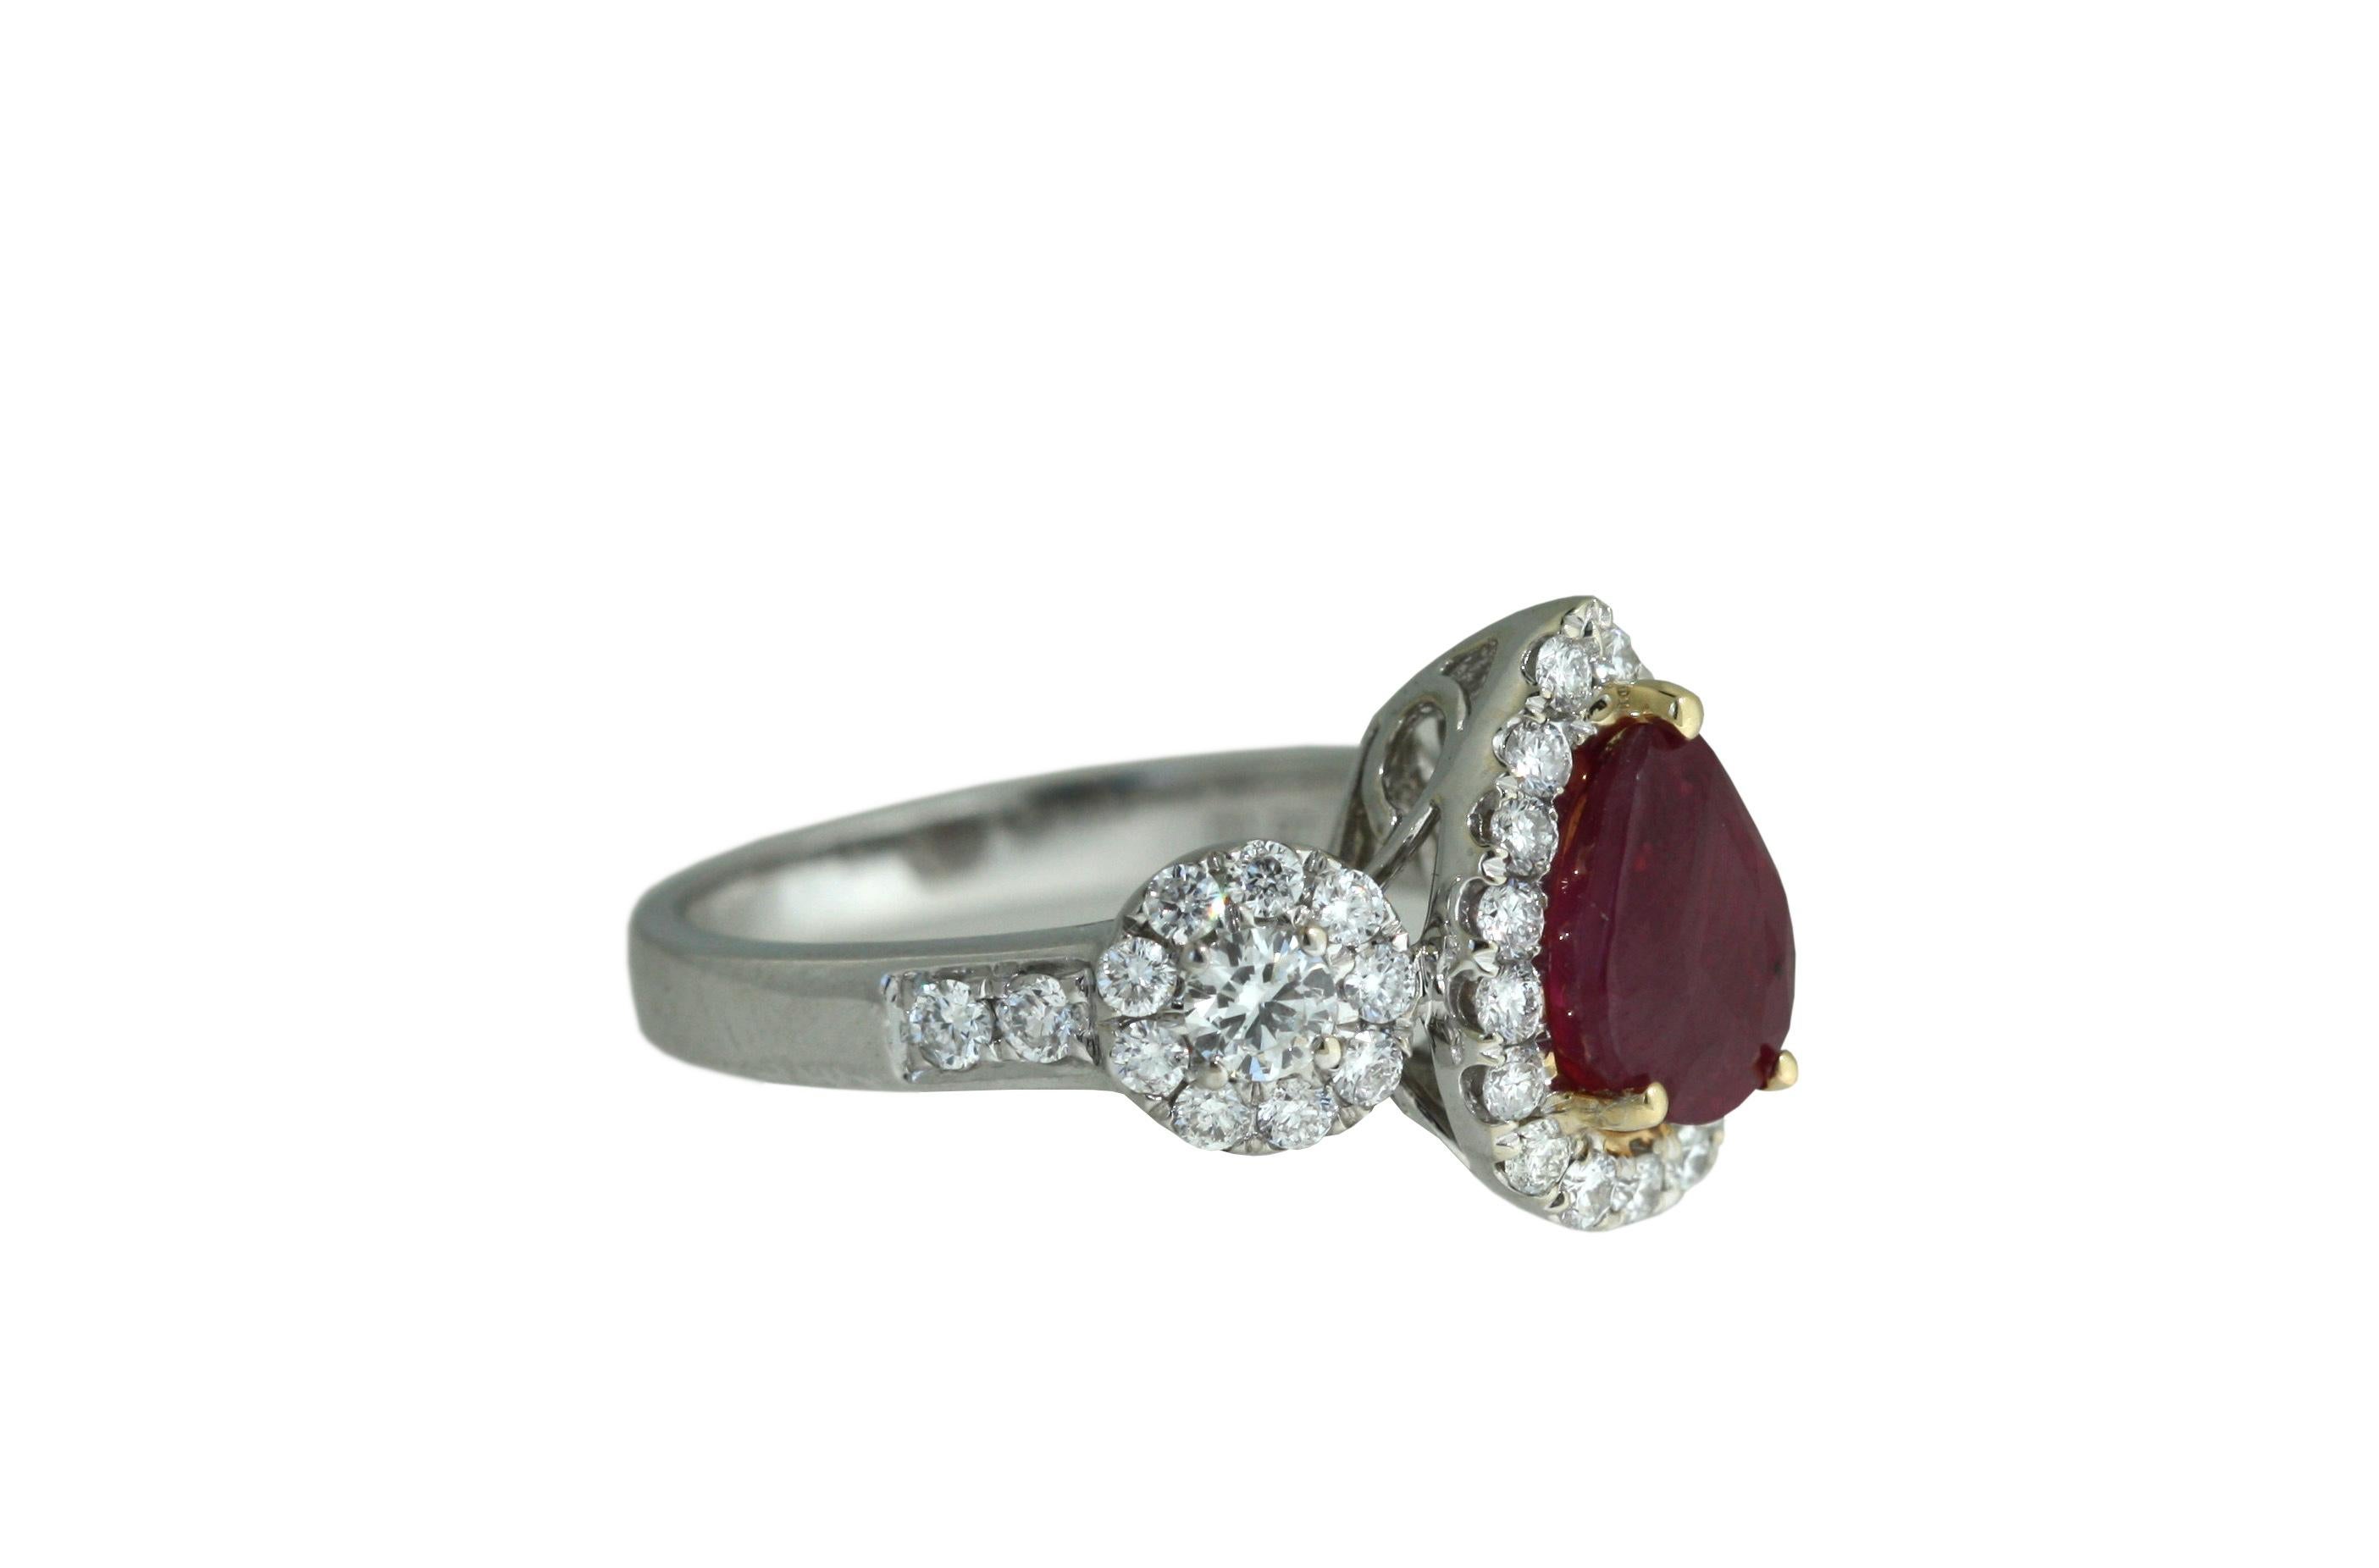 Ruby and Diamond Ring 
The pearl-shaped ruby weighing 3.03 carats, set within a mounting comprised of round diamonds, 
mounted in 18kt white gold 
6.9 grams (gross) , size 6 1/4